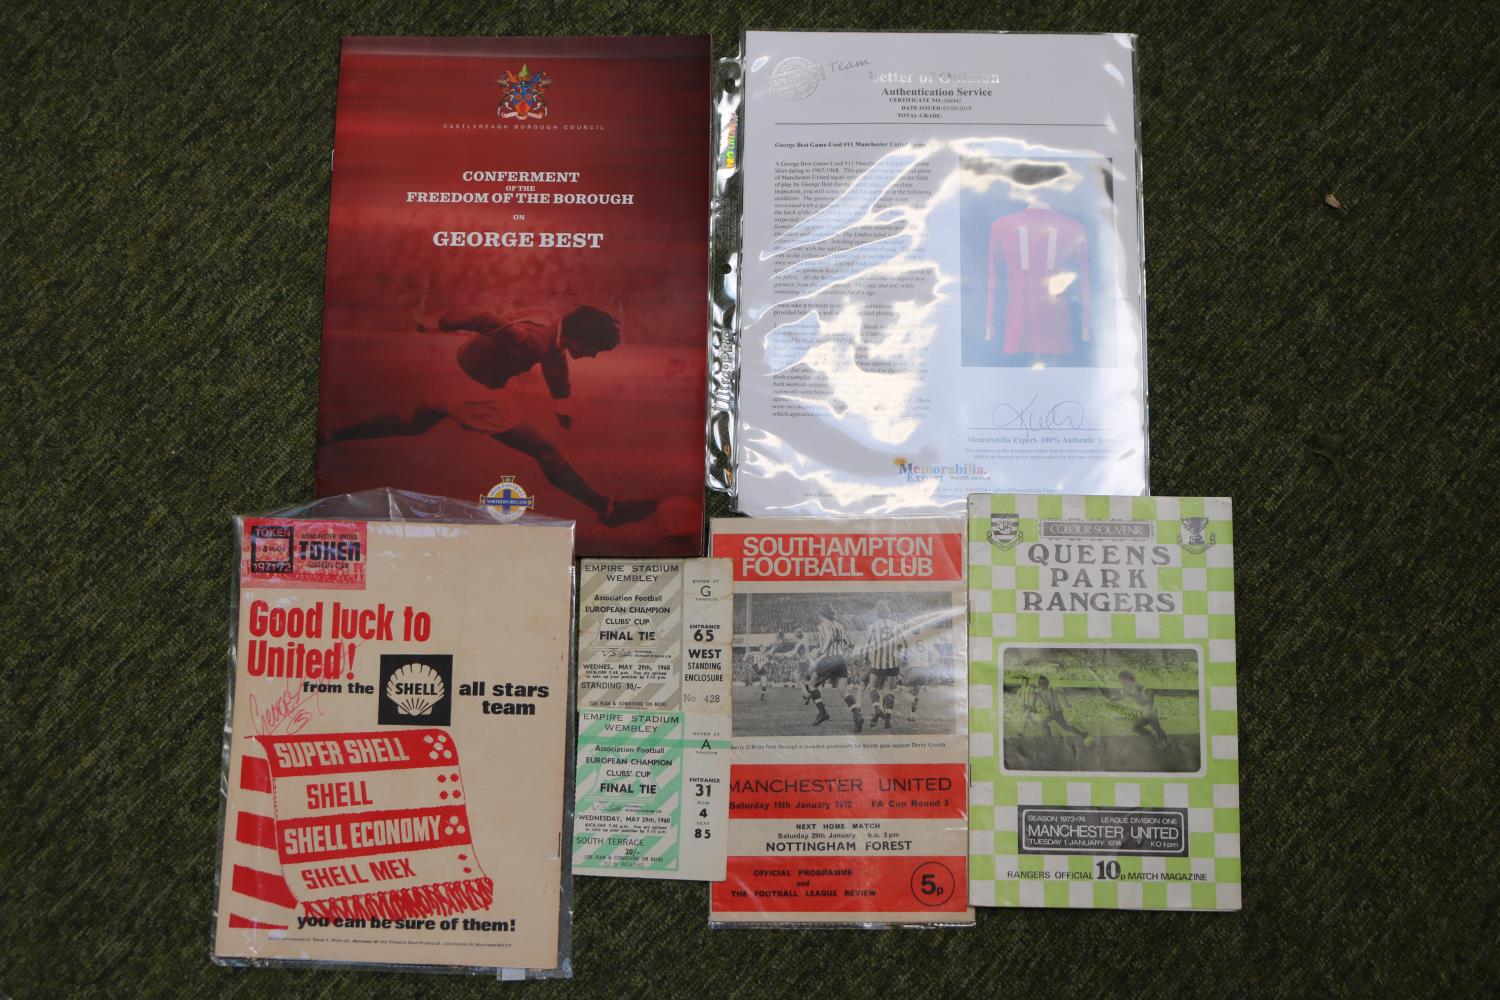 GEORGE BEST 1967/68 MATCH WORN #11 MANCHESTER UNITED HOME JERSEY WITH MEMORABILIA This incredible - Image 9 of 11